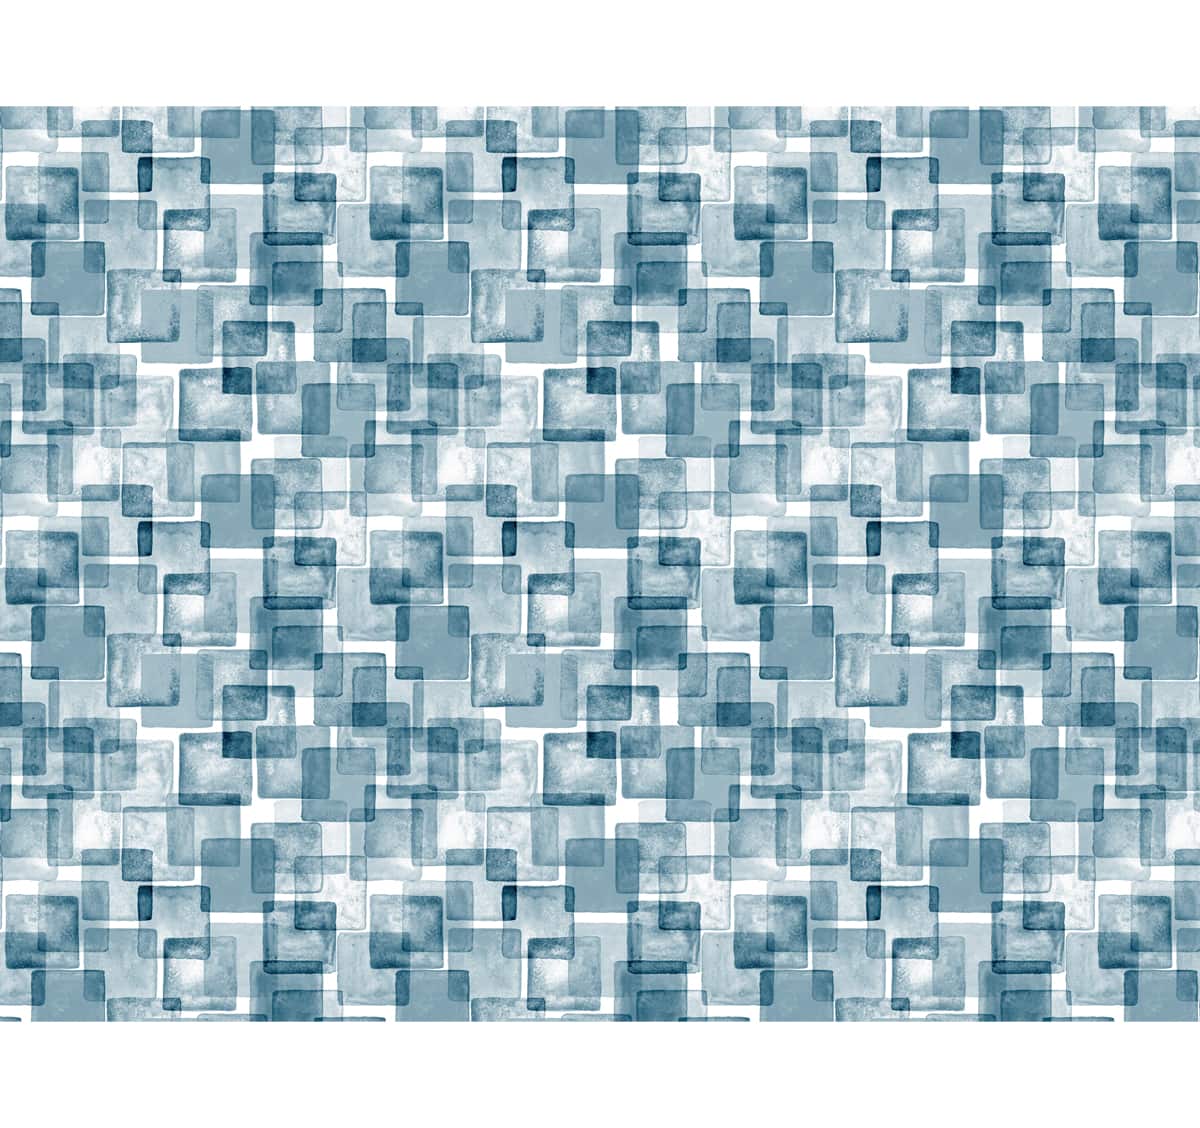 Blue and White Abstract Square Blocks Wallpaper